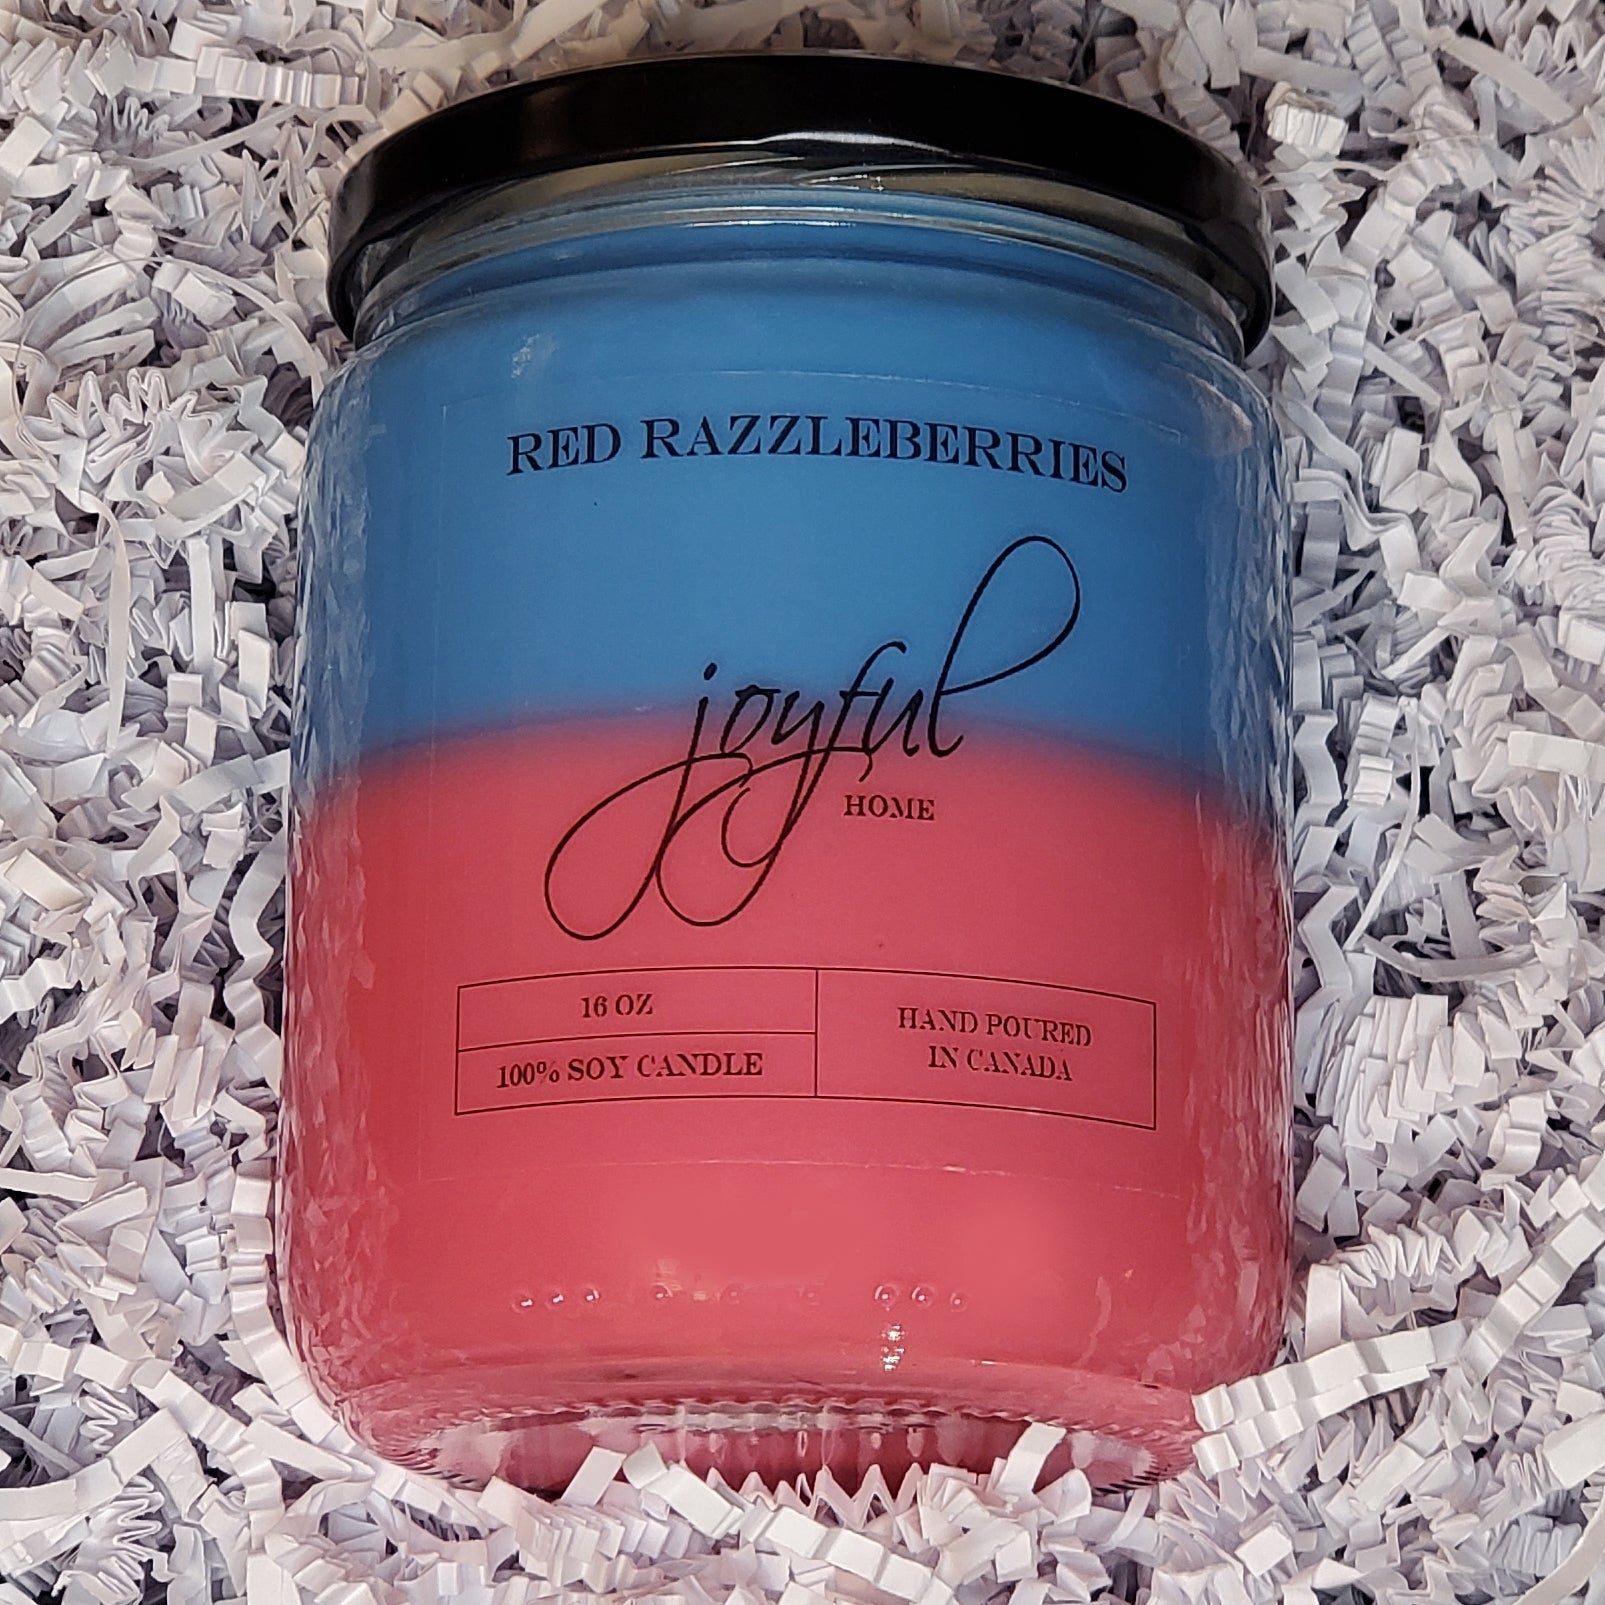 Red Razzleberries Soy Wax 16 oz Candle